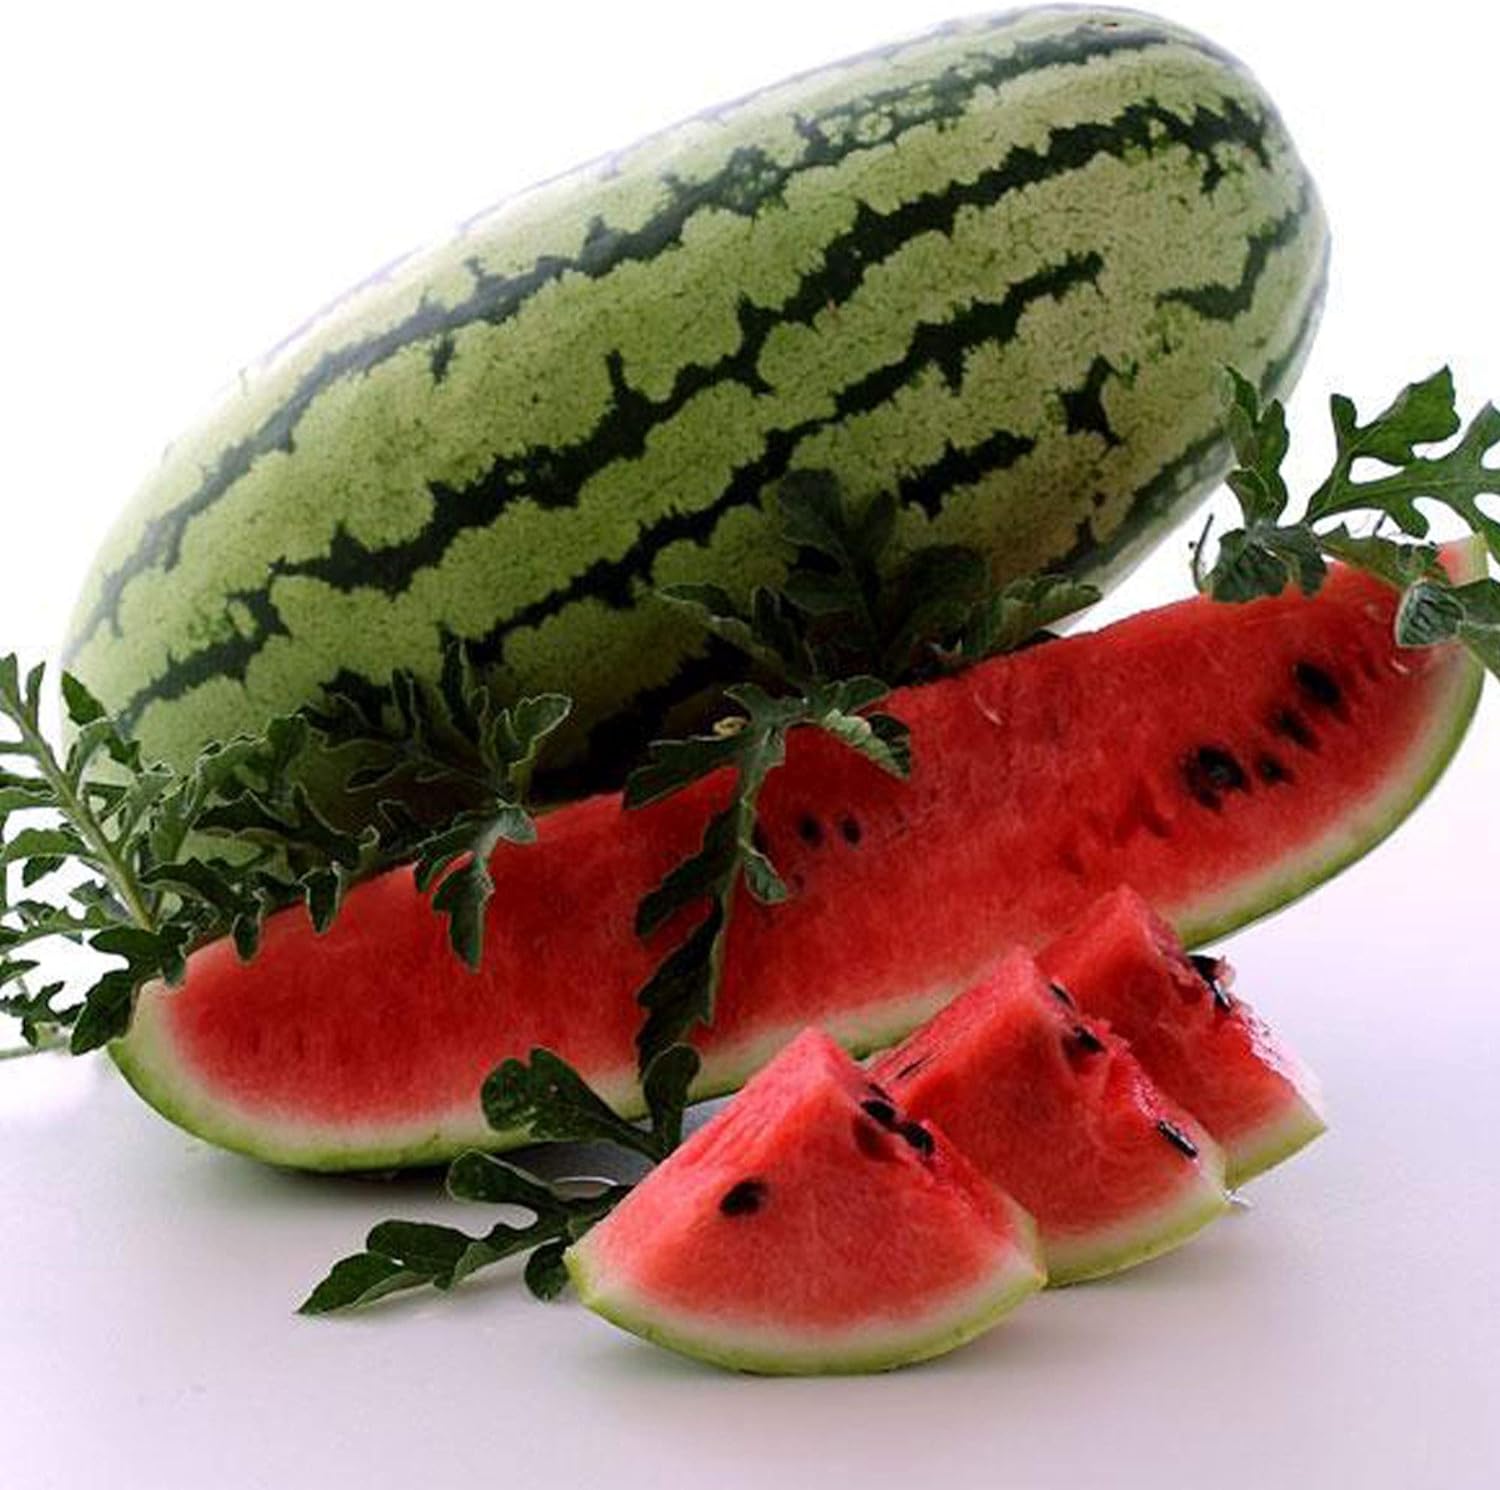 Grow your own delicious, sweet, juicy watermelons at home with these high-quality Sweet Watermelon Seeds for planting!